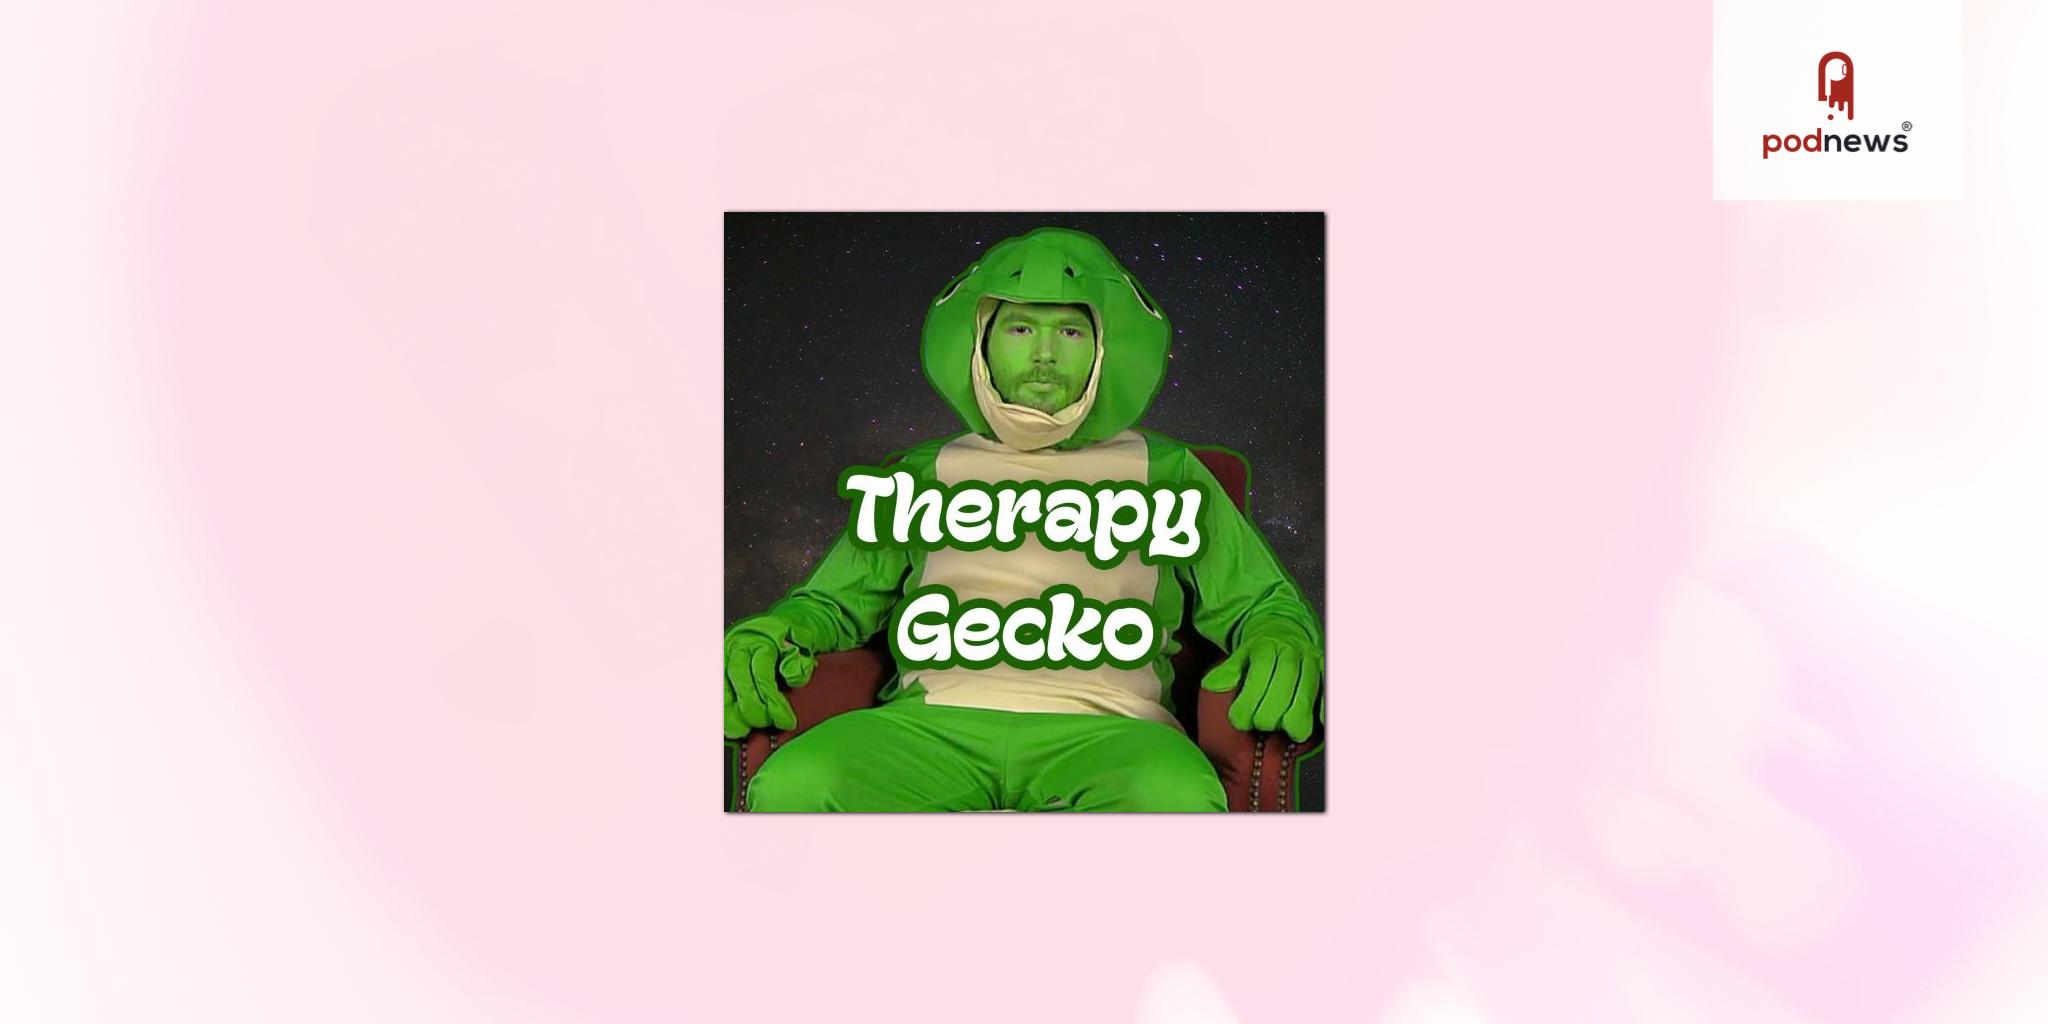 SiriusXM Signs Exclusive Agreement with Therapy Gecko